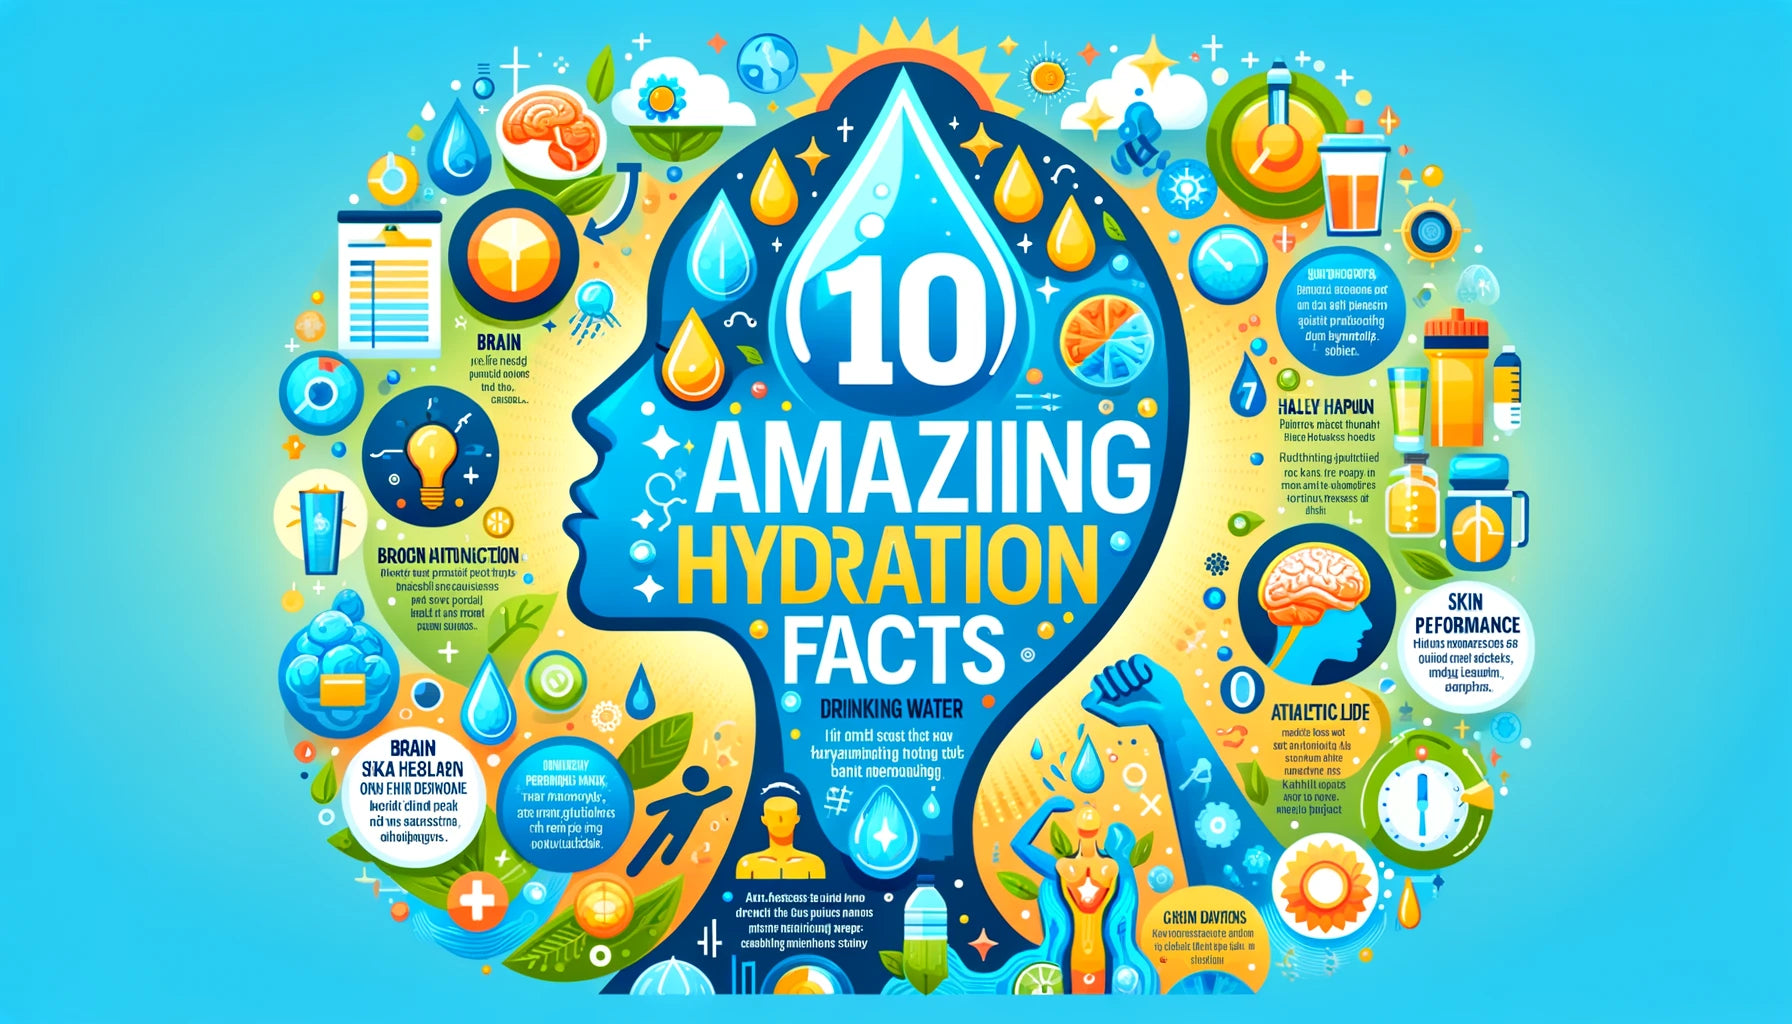 10 Amazing Hydration Facts About Drinking Water